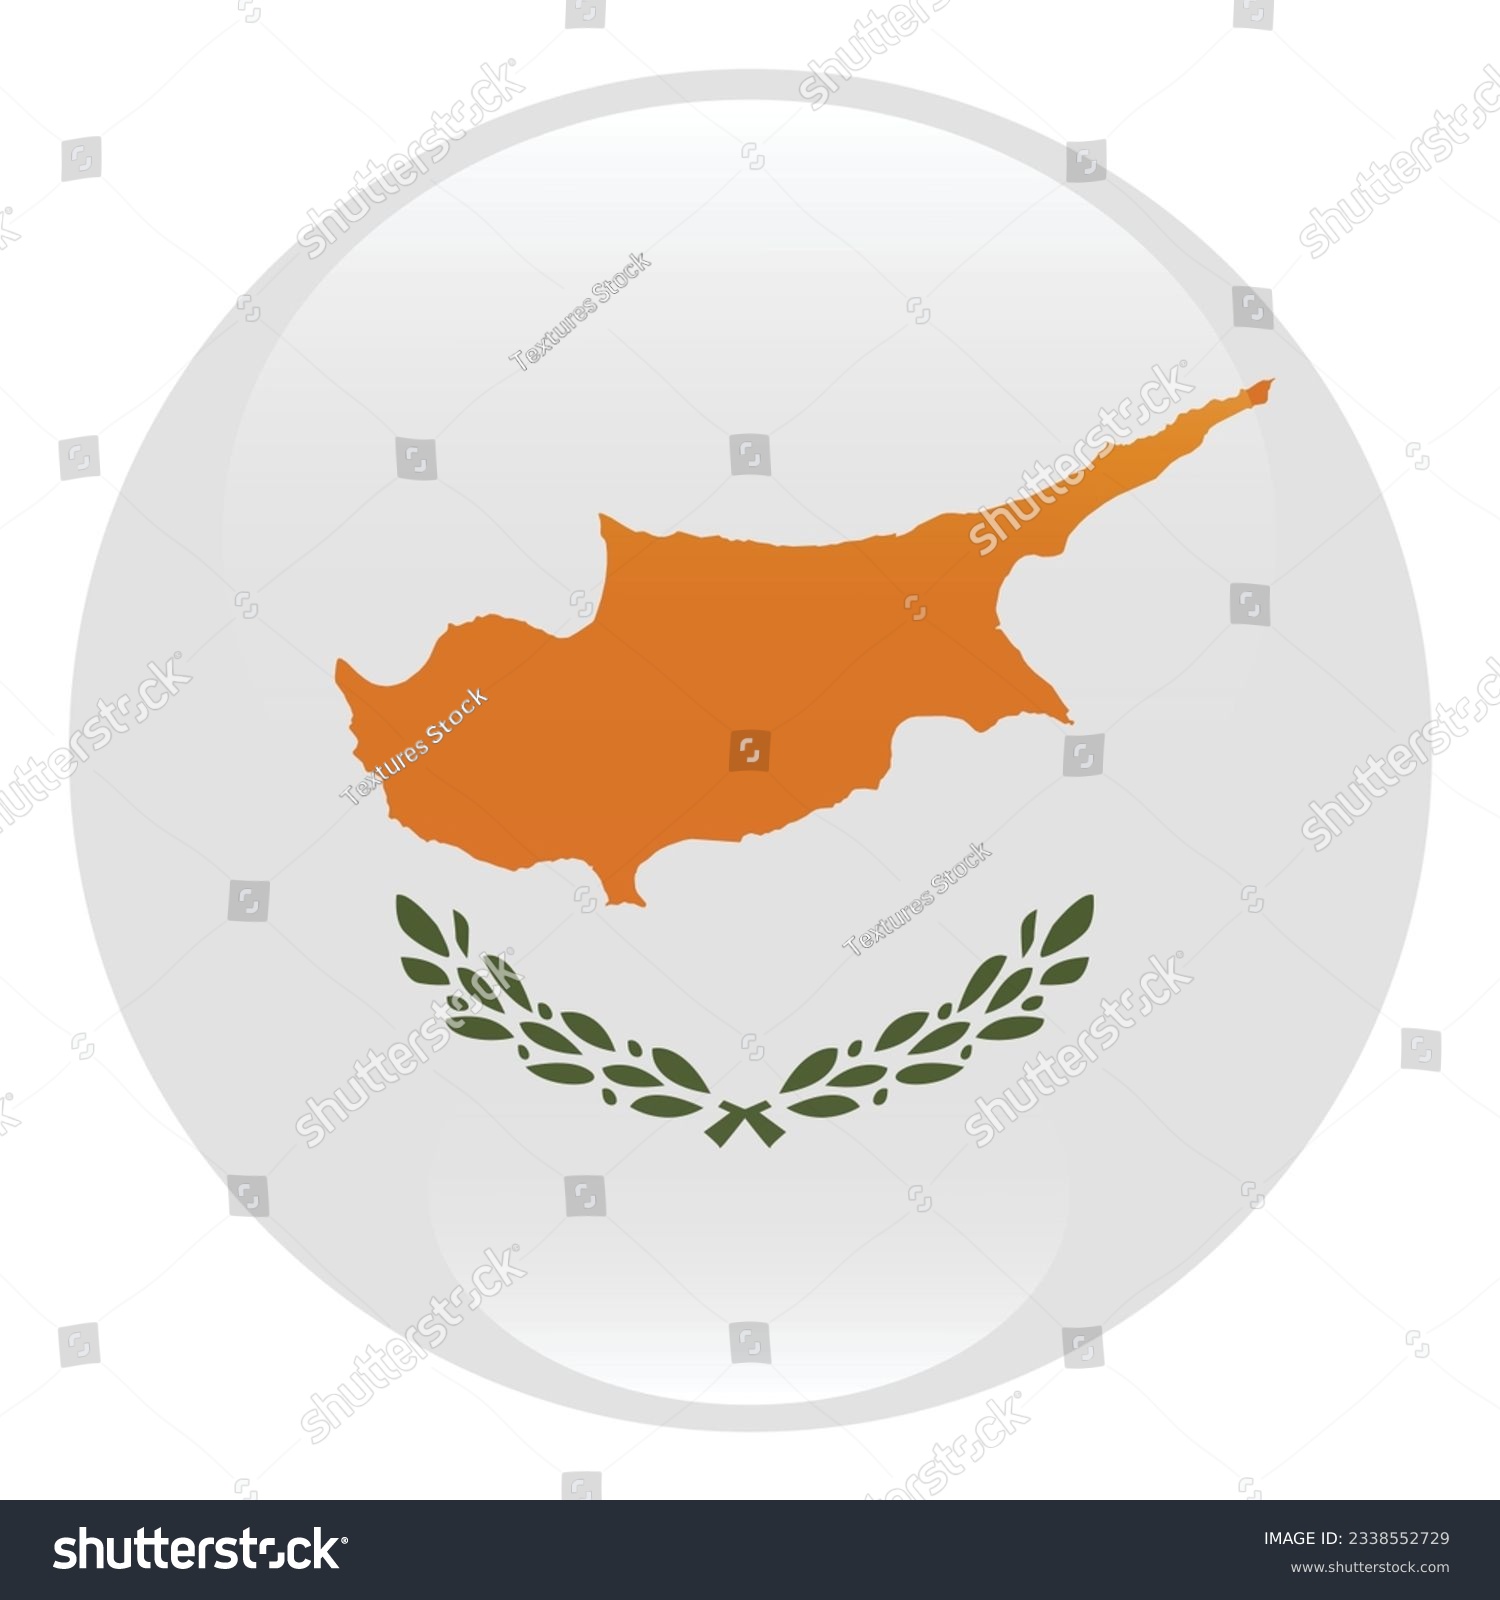 SVG of The flag of Cyprus. Flag icon. Standard color. Circle icon flag. 3d illustration. Computer illustration. Digital illustration. Vector illustration. svg